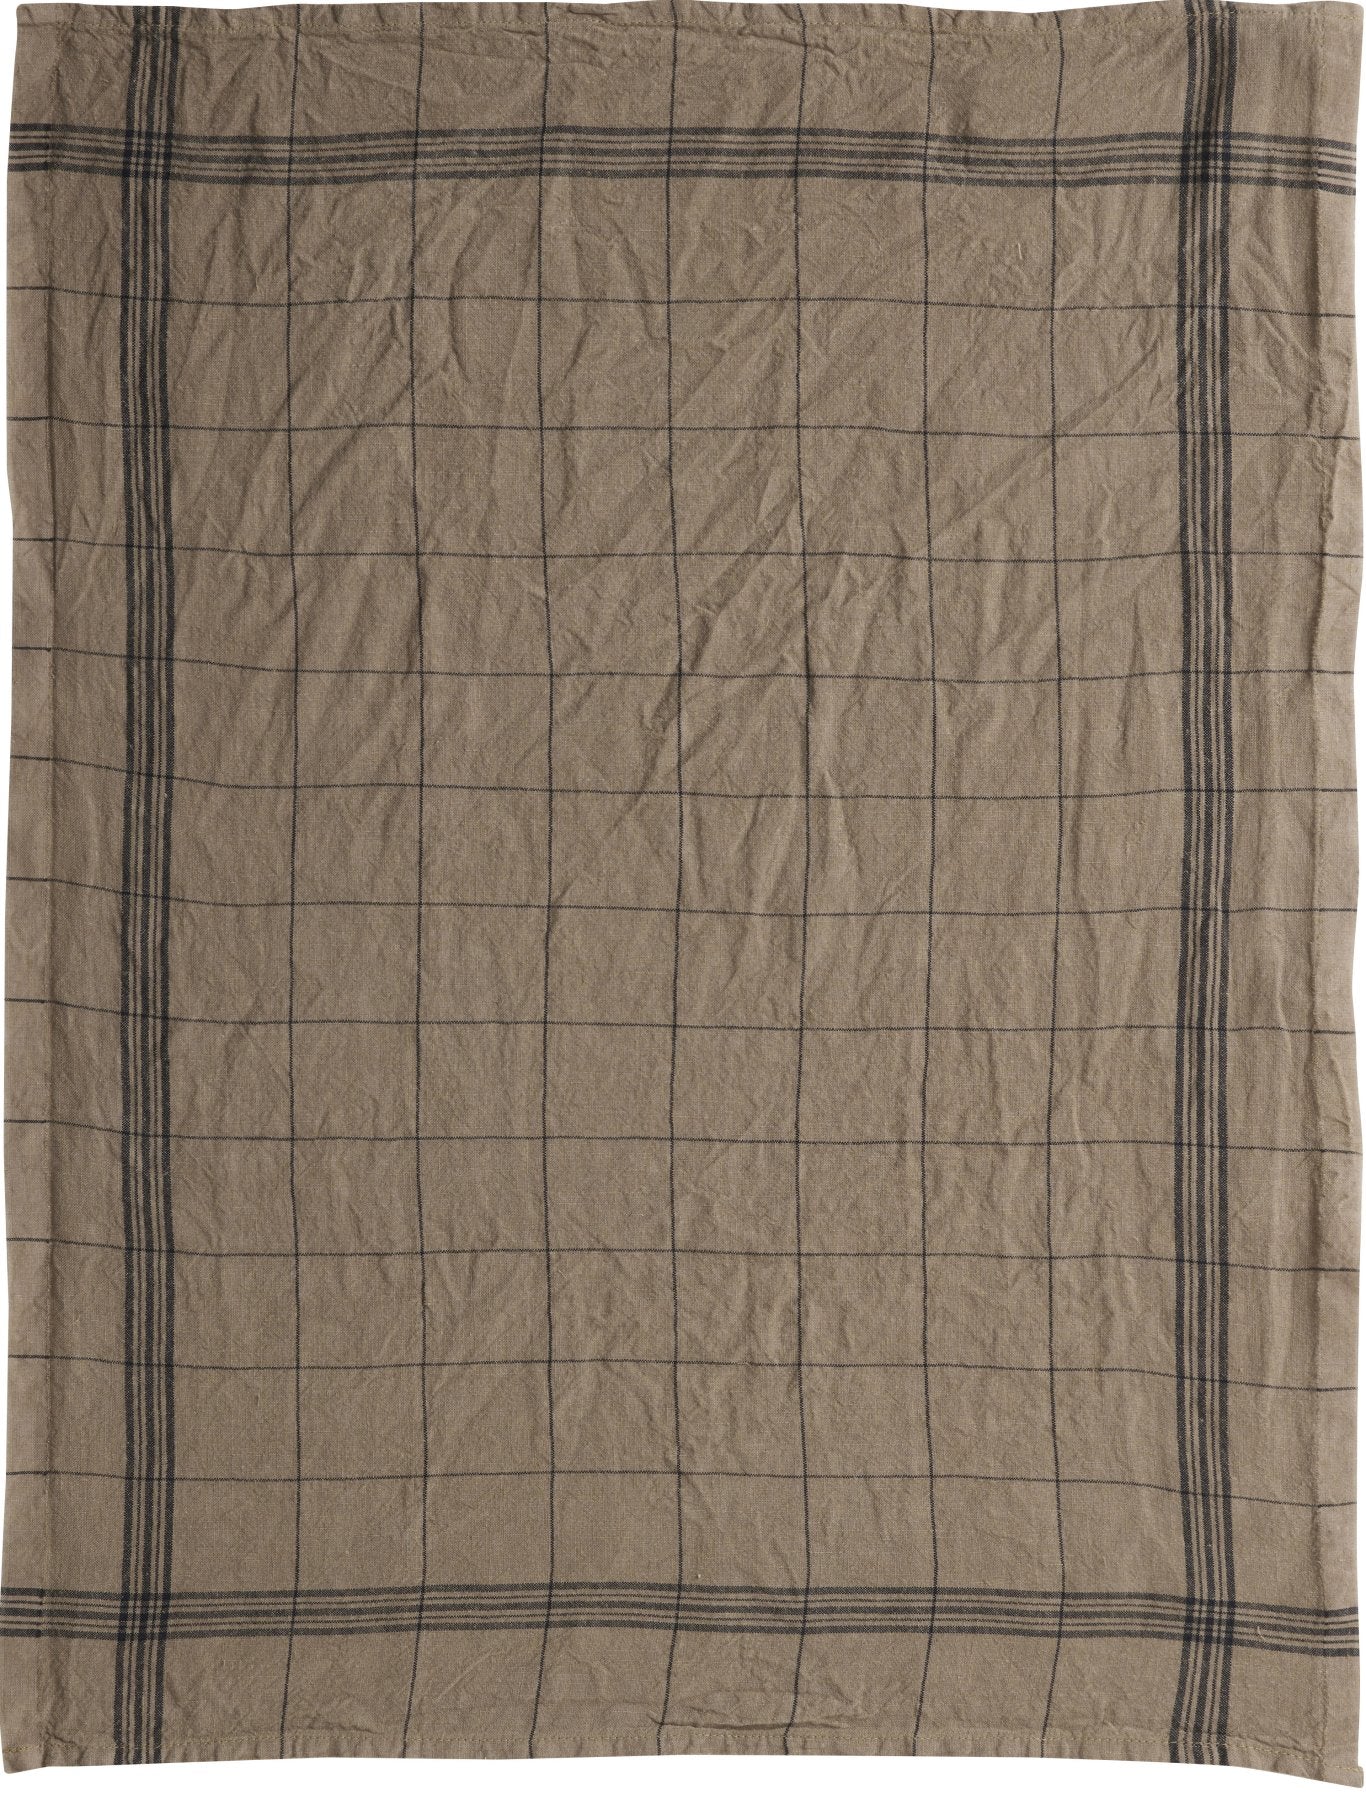 Charvet Editions "Bistro" (Châtaigne), Natural woven linen tea towel. Made in France.